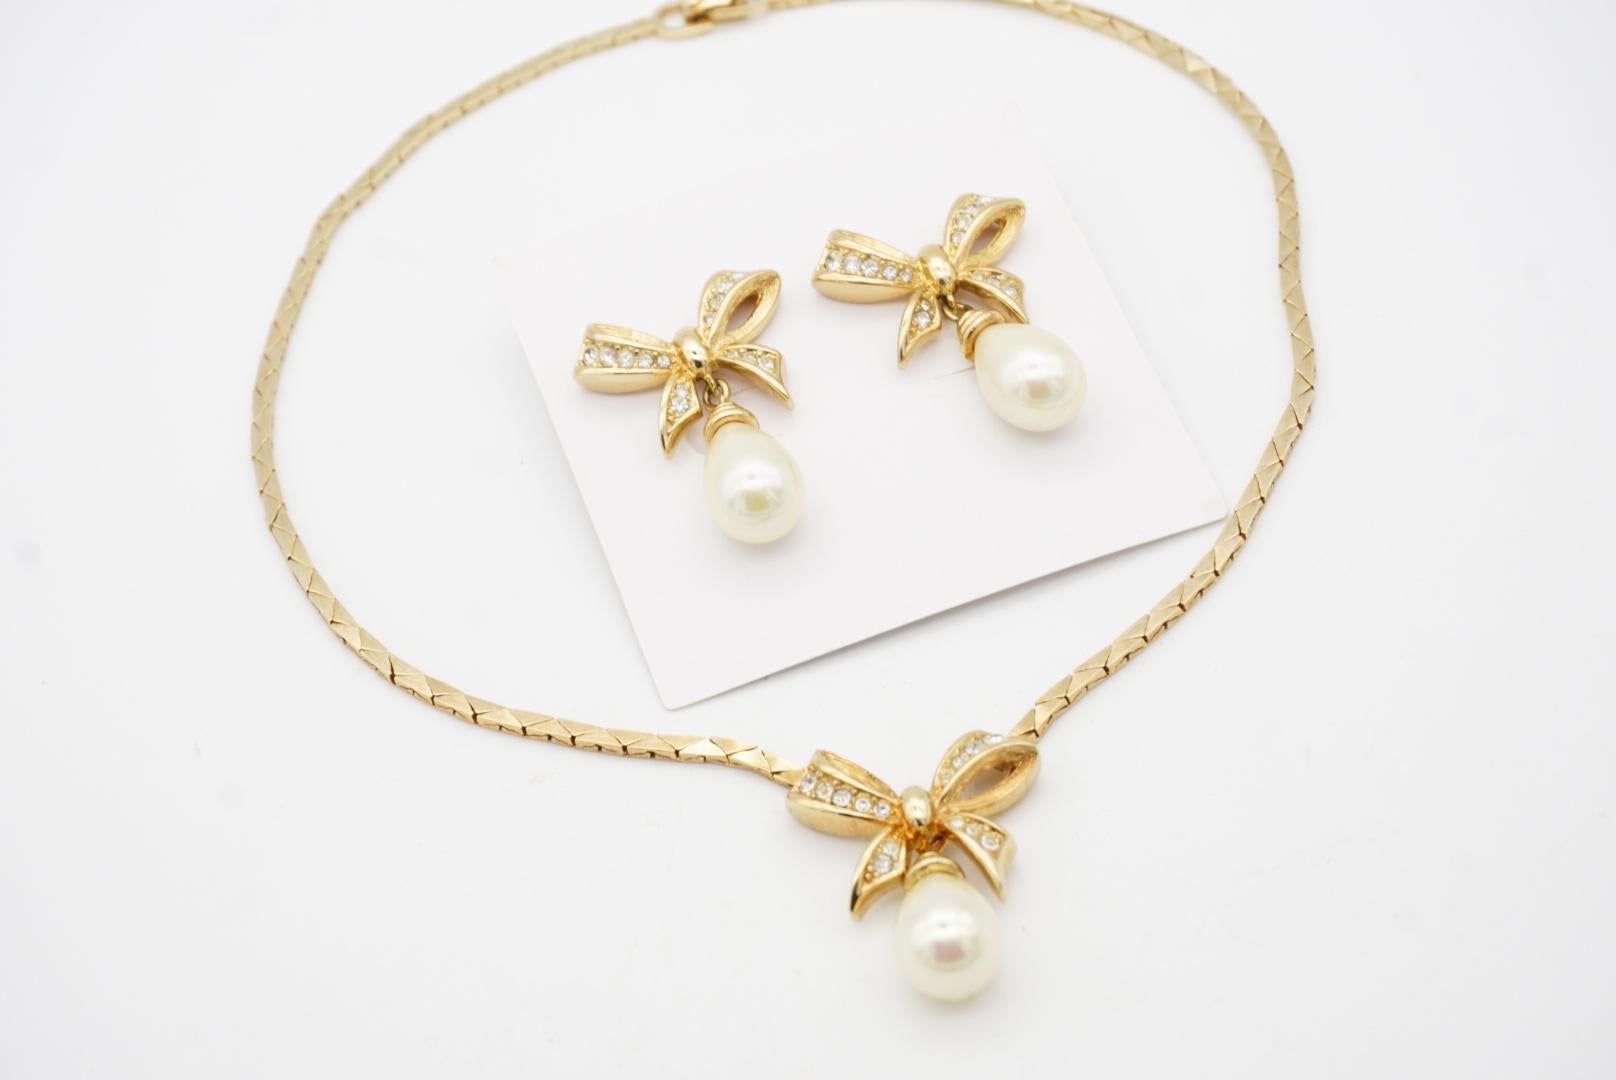 Christian Dior Vintage 1980s Crystals Bow Pearl Teardrop Set Necklace Earrings For Sale 3